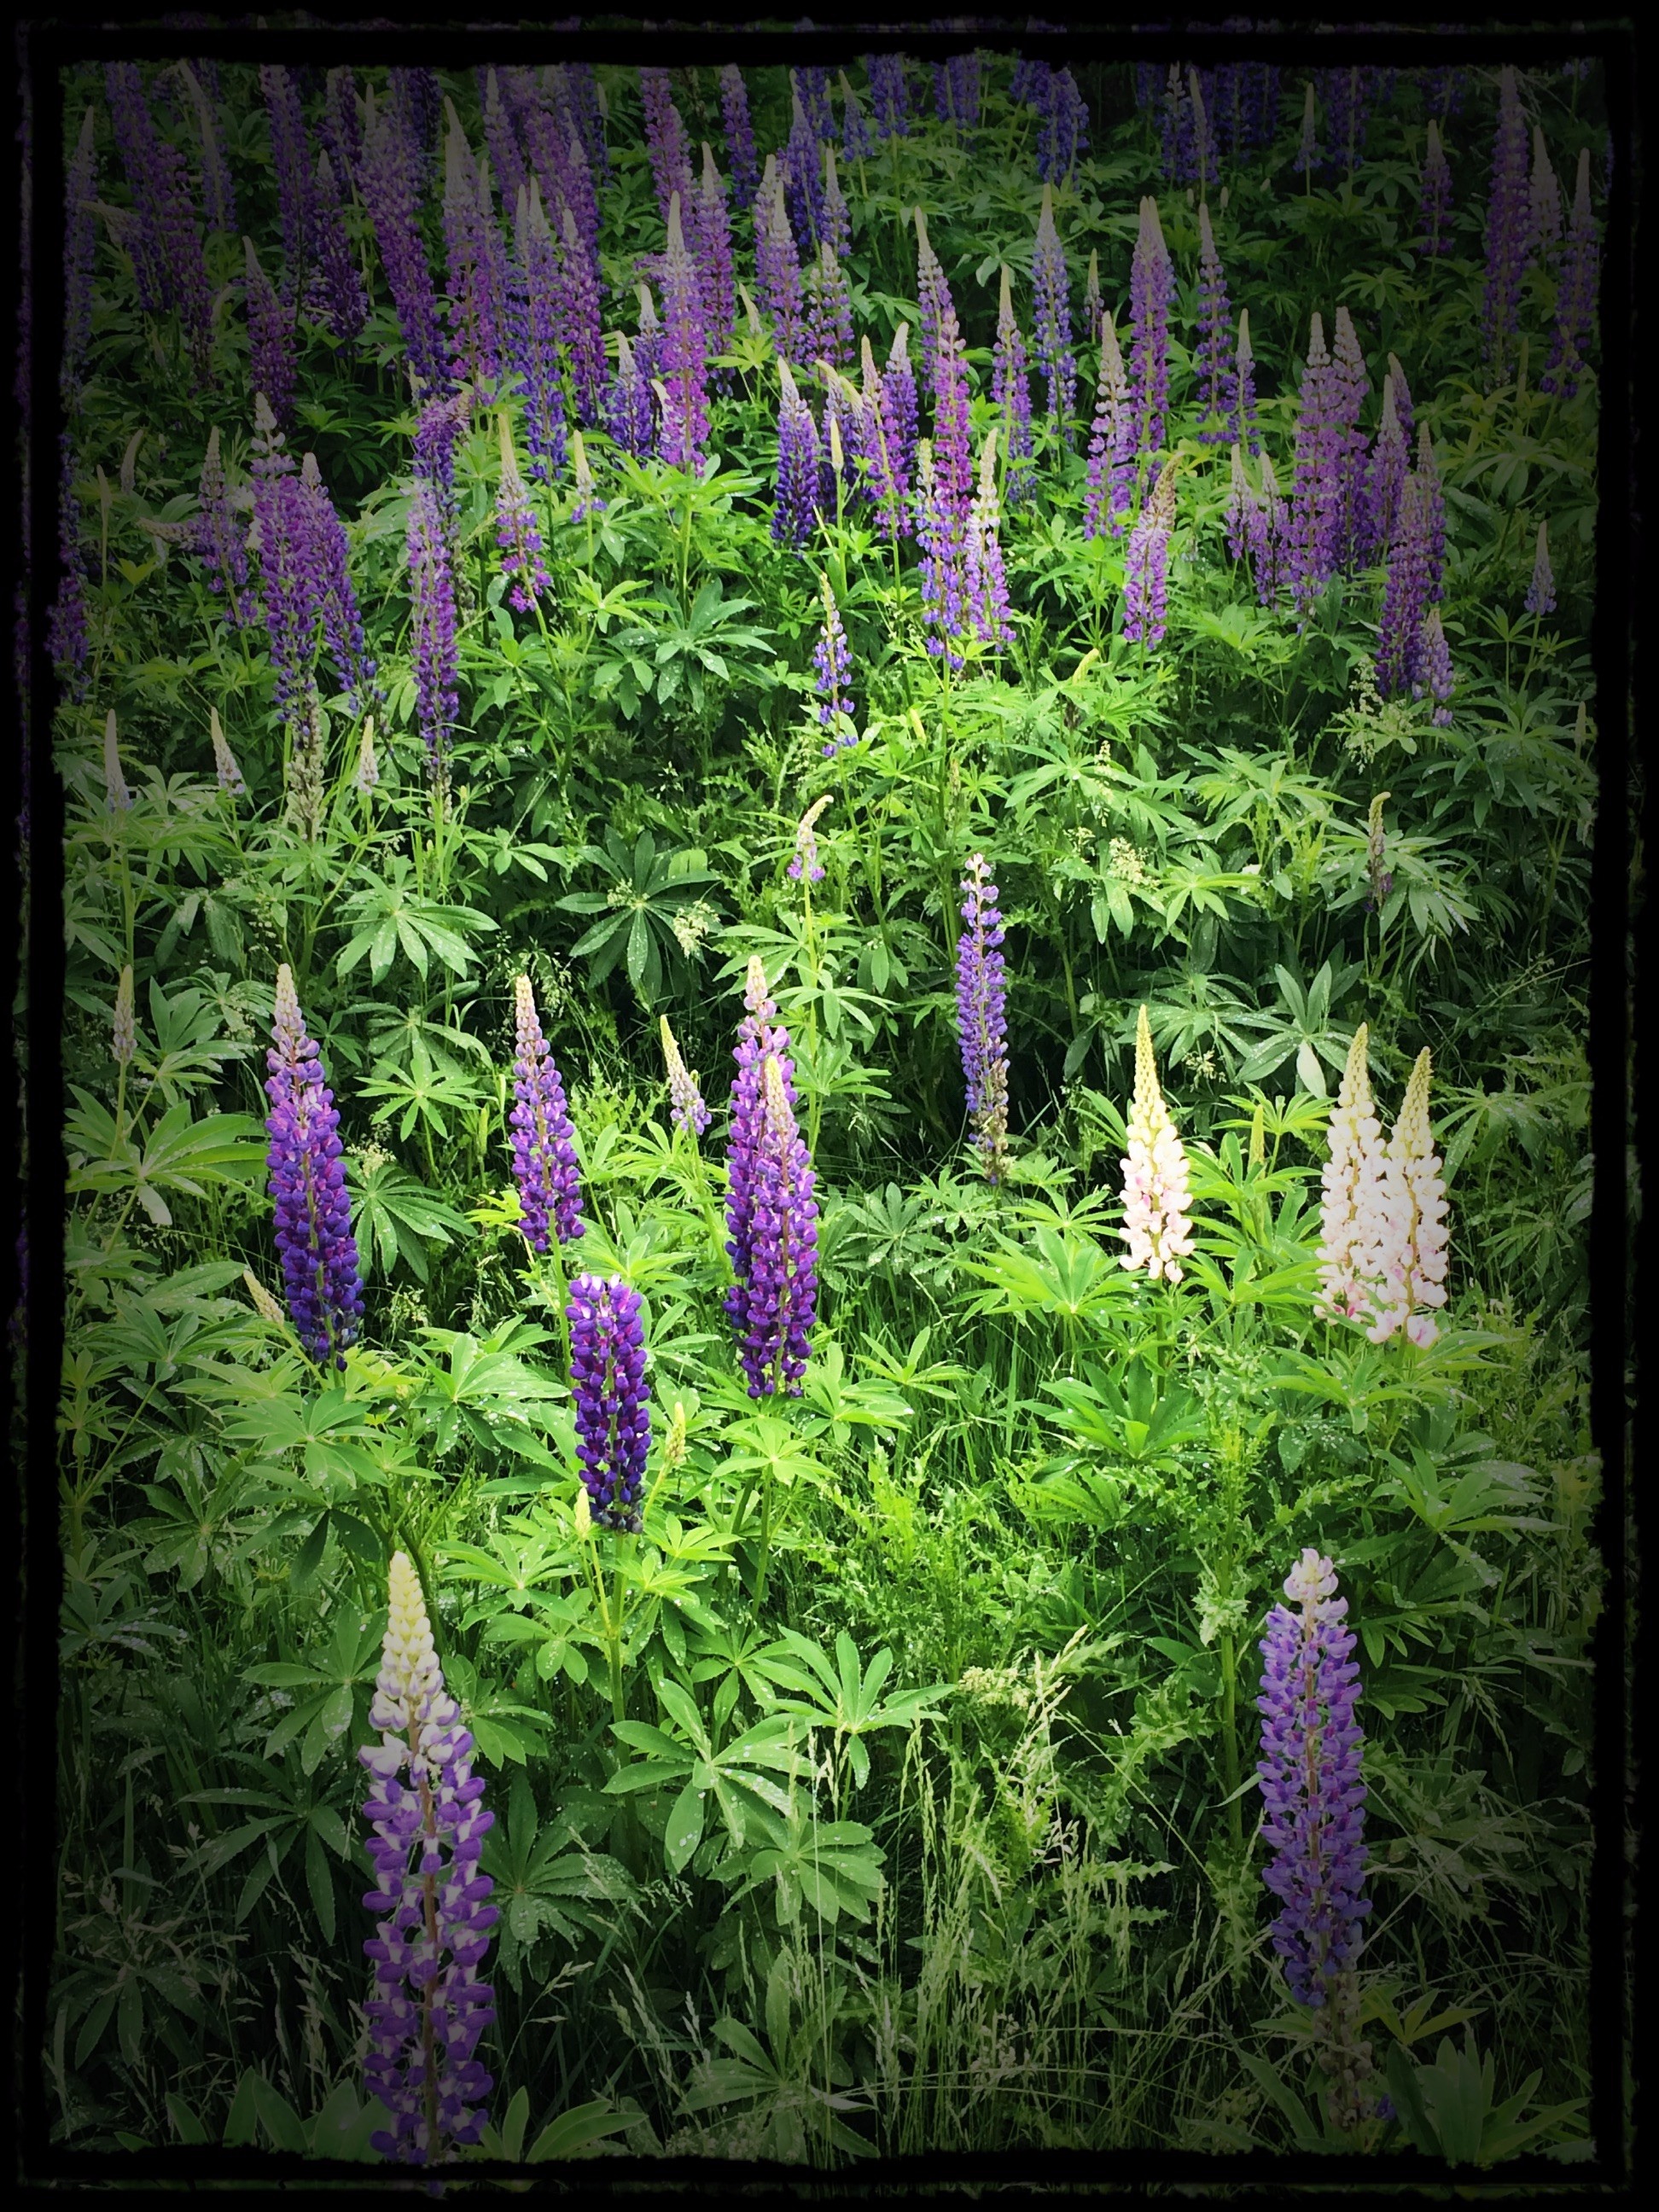 by Mary Turner: "Lots of Lovely Lupine" in Sun Valley These remind me of all the Lupine I saw in Sweden on the Solstice of 2012.